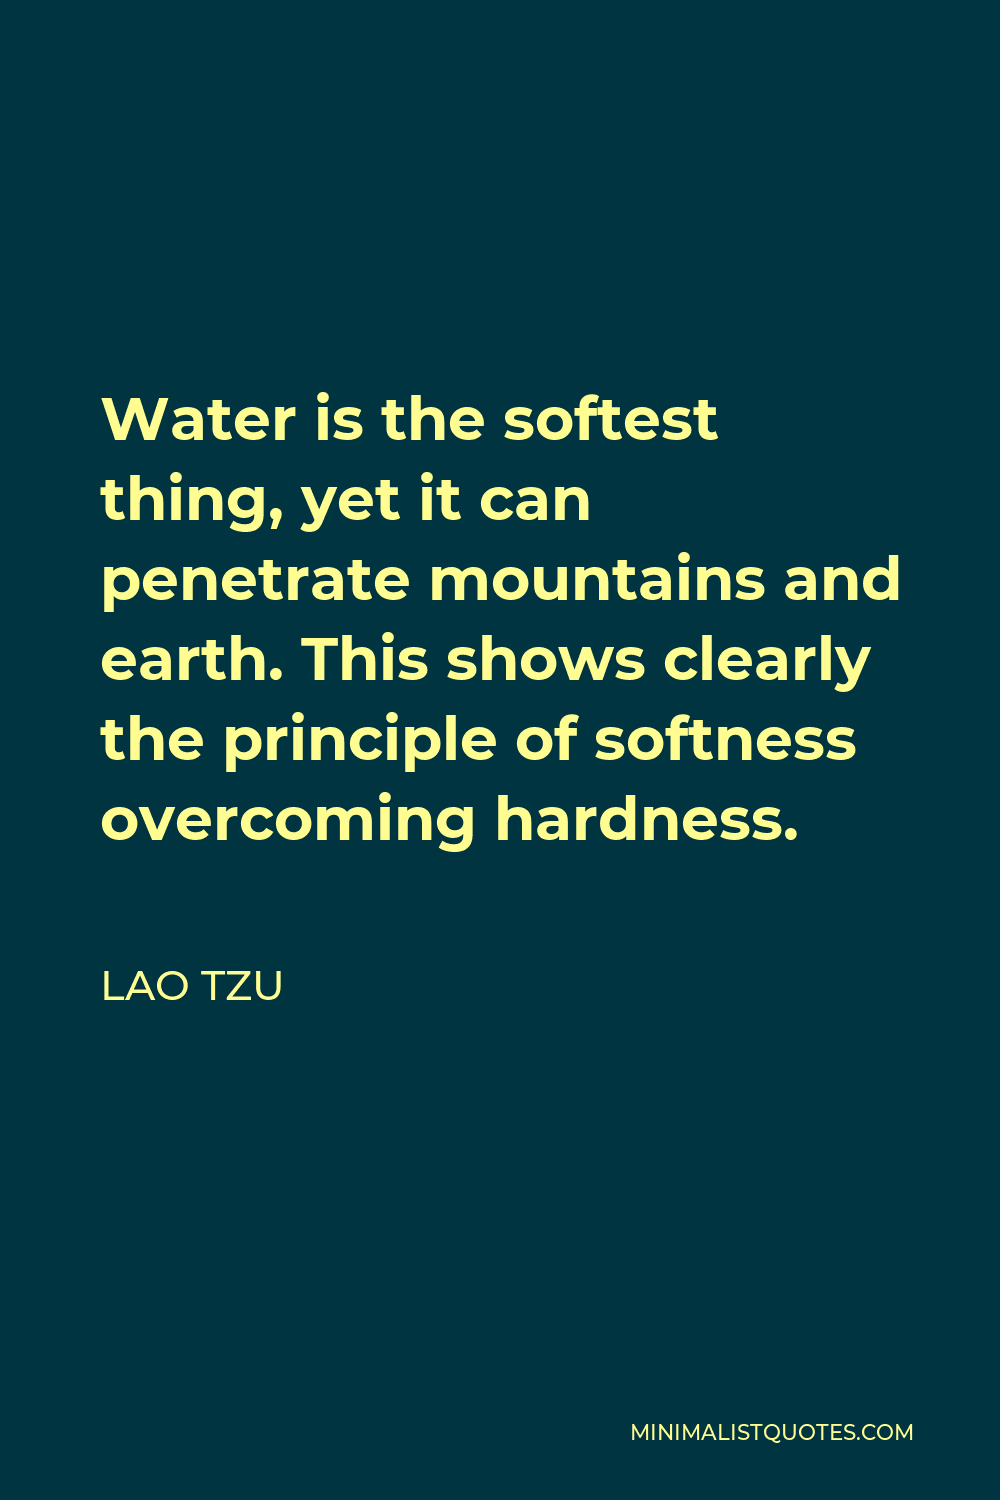 Lao Tzu Quote - Water is the softest thing, yet it can penetrate mountains and earth. This shows clearly the principle of softness overcoming hardness.